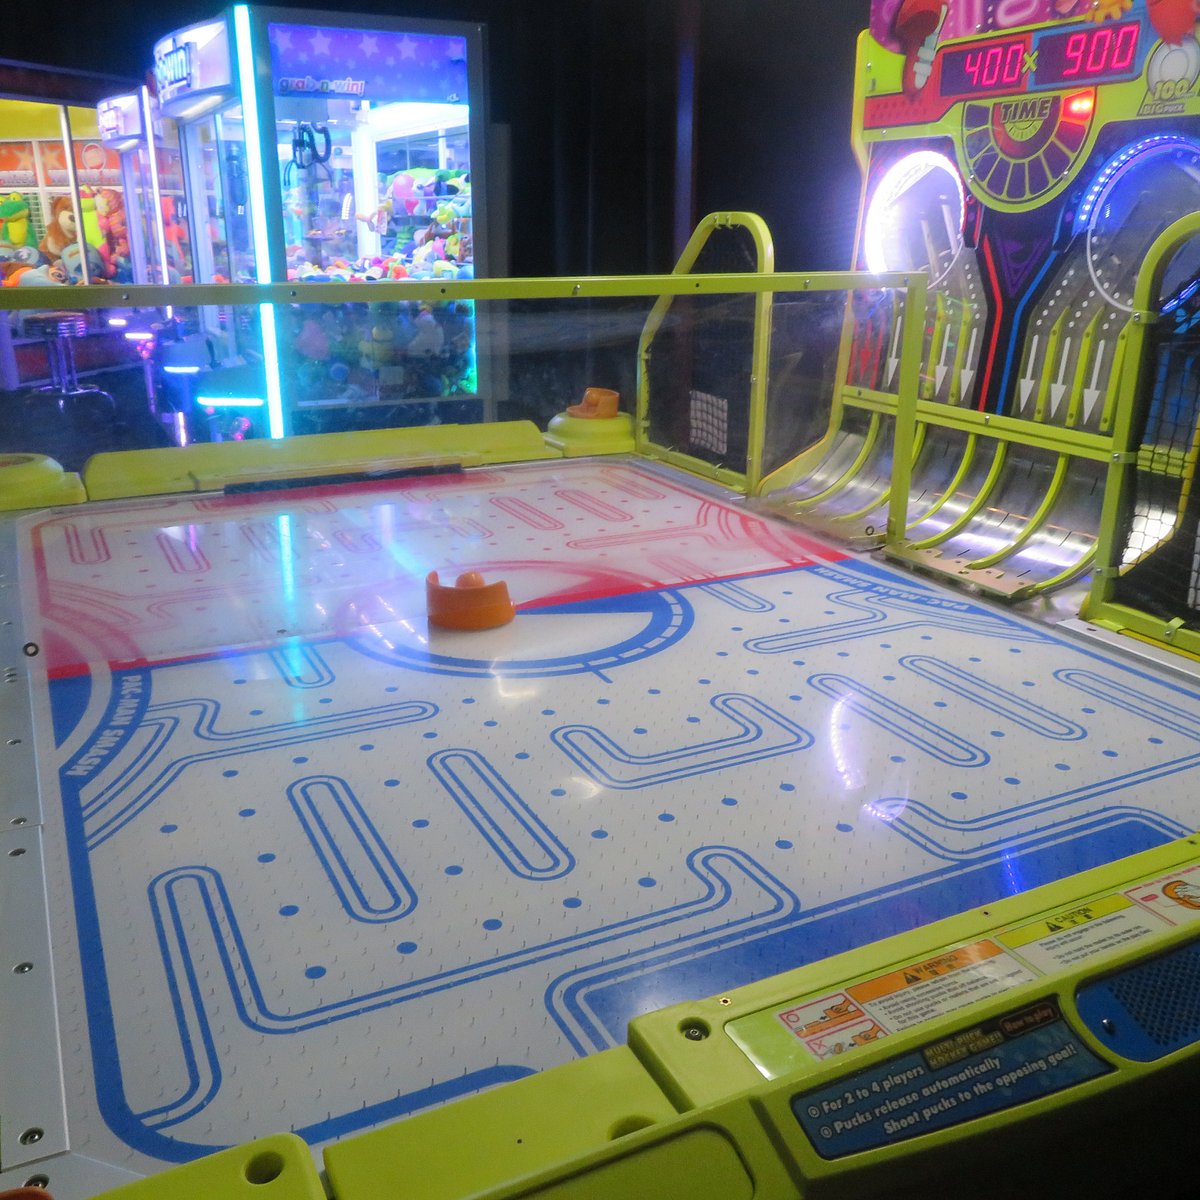 Dave & Buster's - Arcade (Milpitas) - All You Need to Know BEFORE You Go